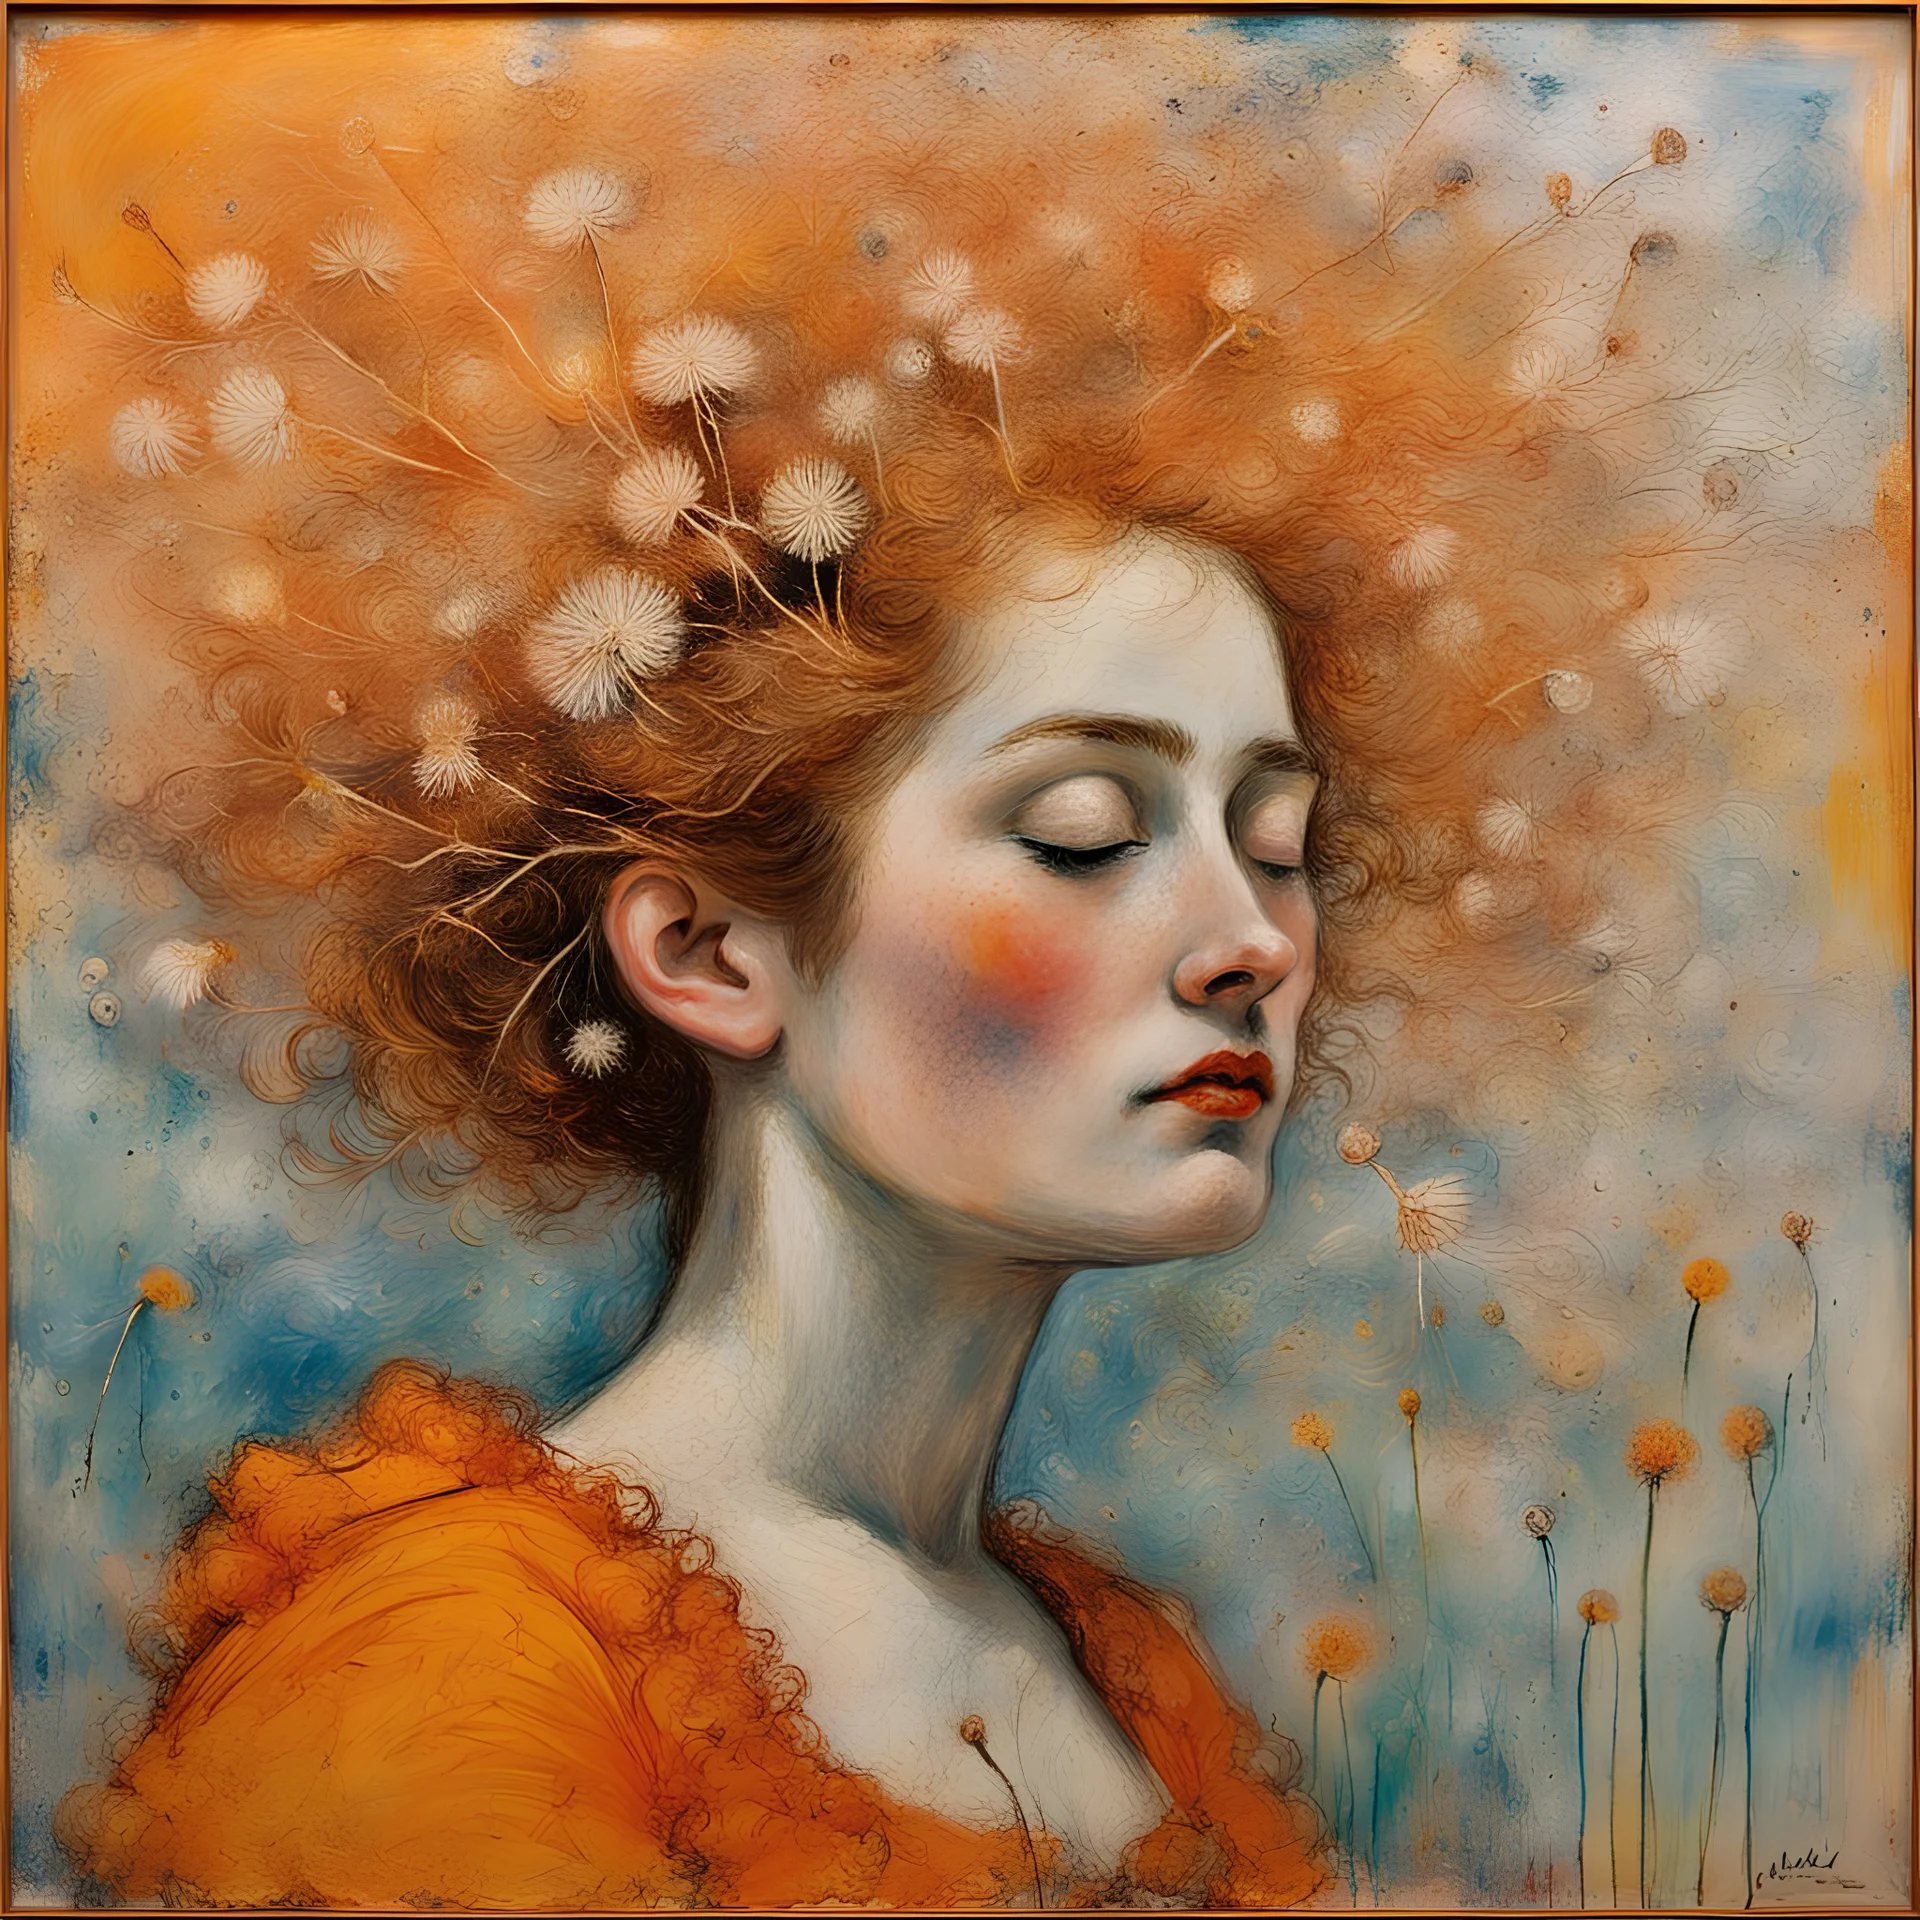 woman by James Ensor ; watching dandelion seeds in the wind, alcohol inks, chalks, oil pant, glitter, mixed media; made of a fresh orange color that has been cut open, photo-realistic techniques